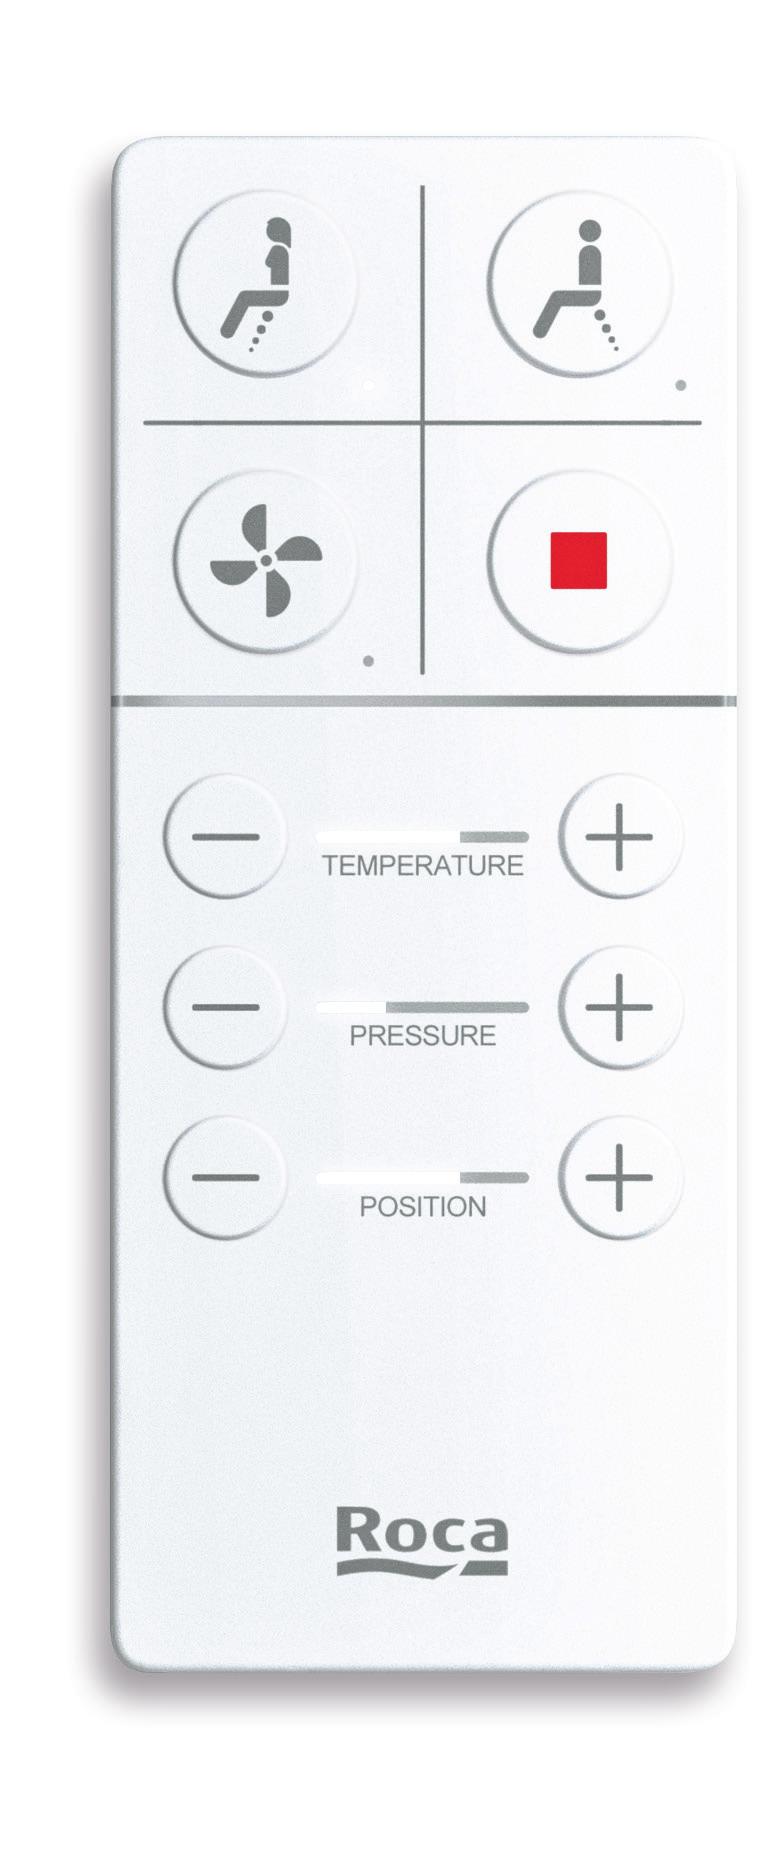 Main functions: Cleaning Drying Intuitive, easy-to-use remote control Display bars show selected levels Easily adjustable settings of: Water temperature